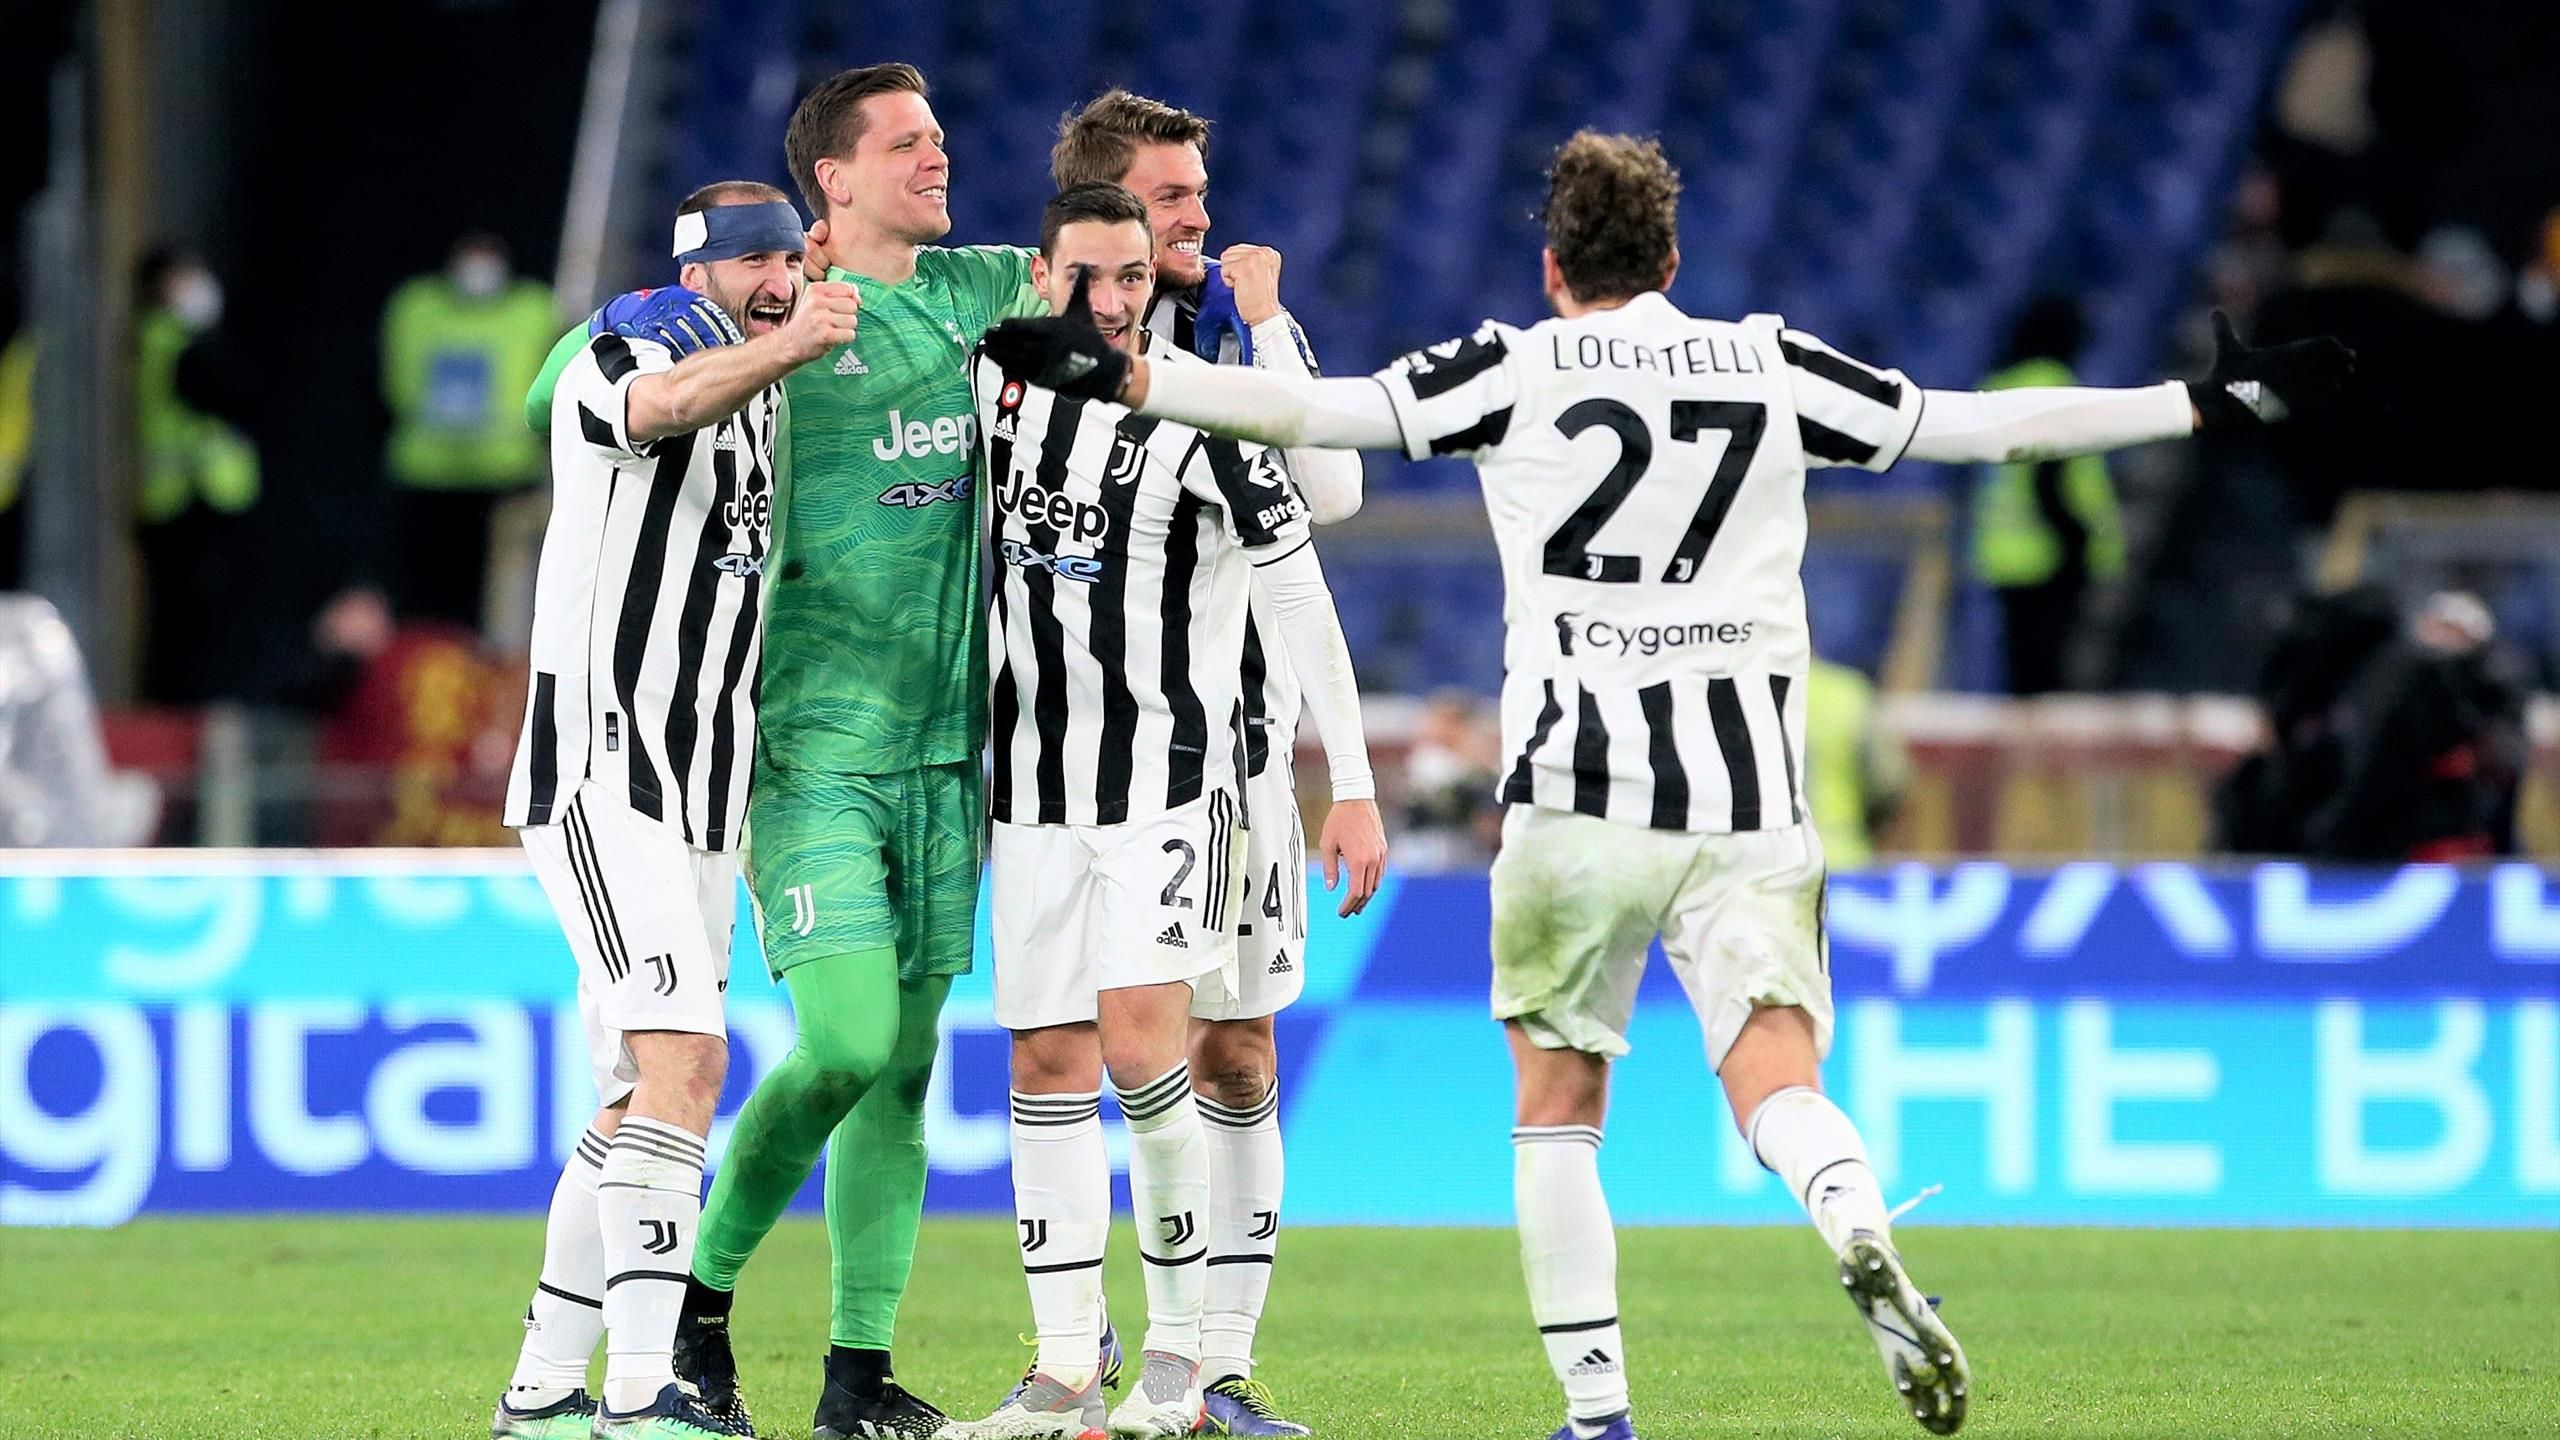 Roma 3-4 Juventus Juve fight back from two goals down to beat Jose Mourinhos Roma in seven-goal thriller